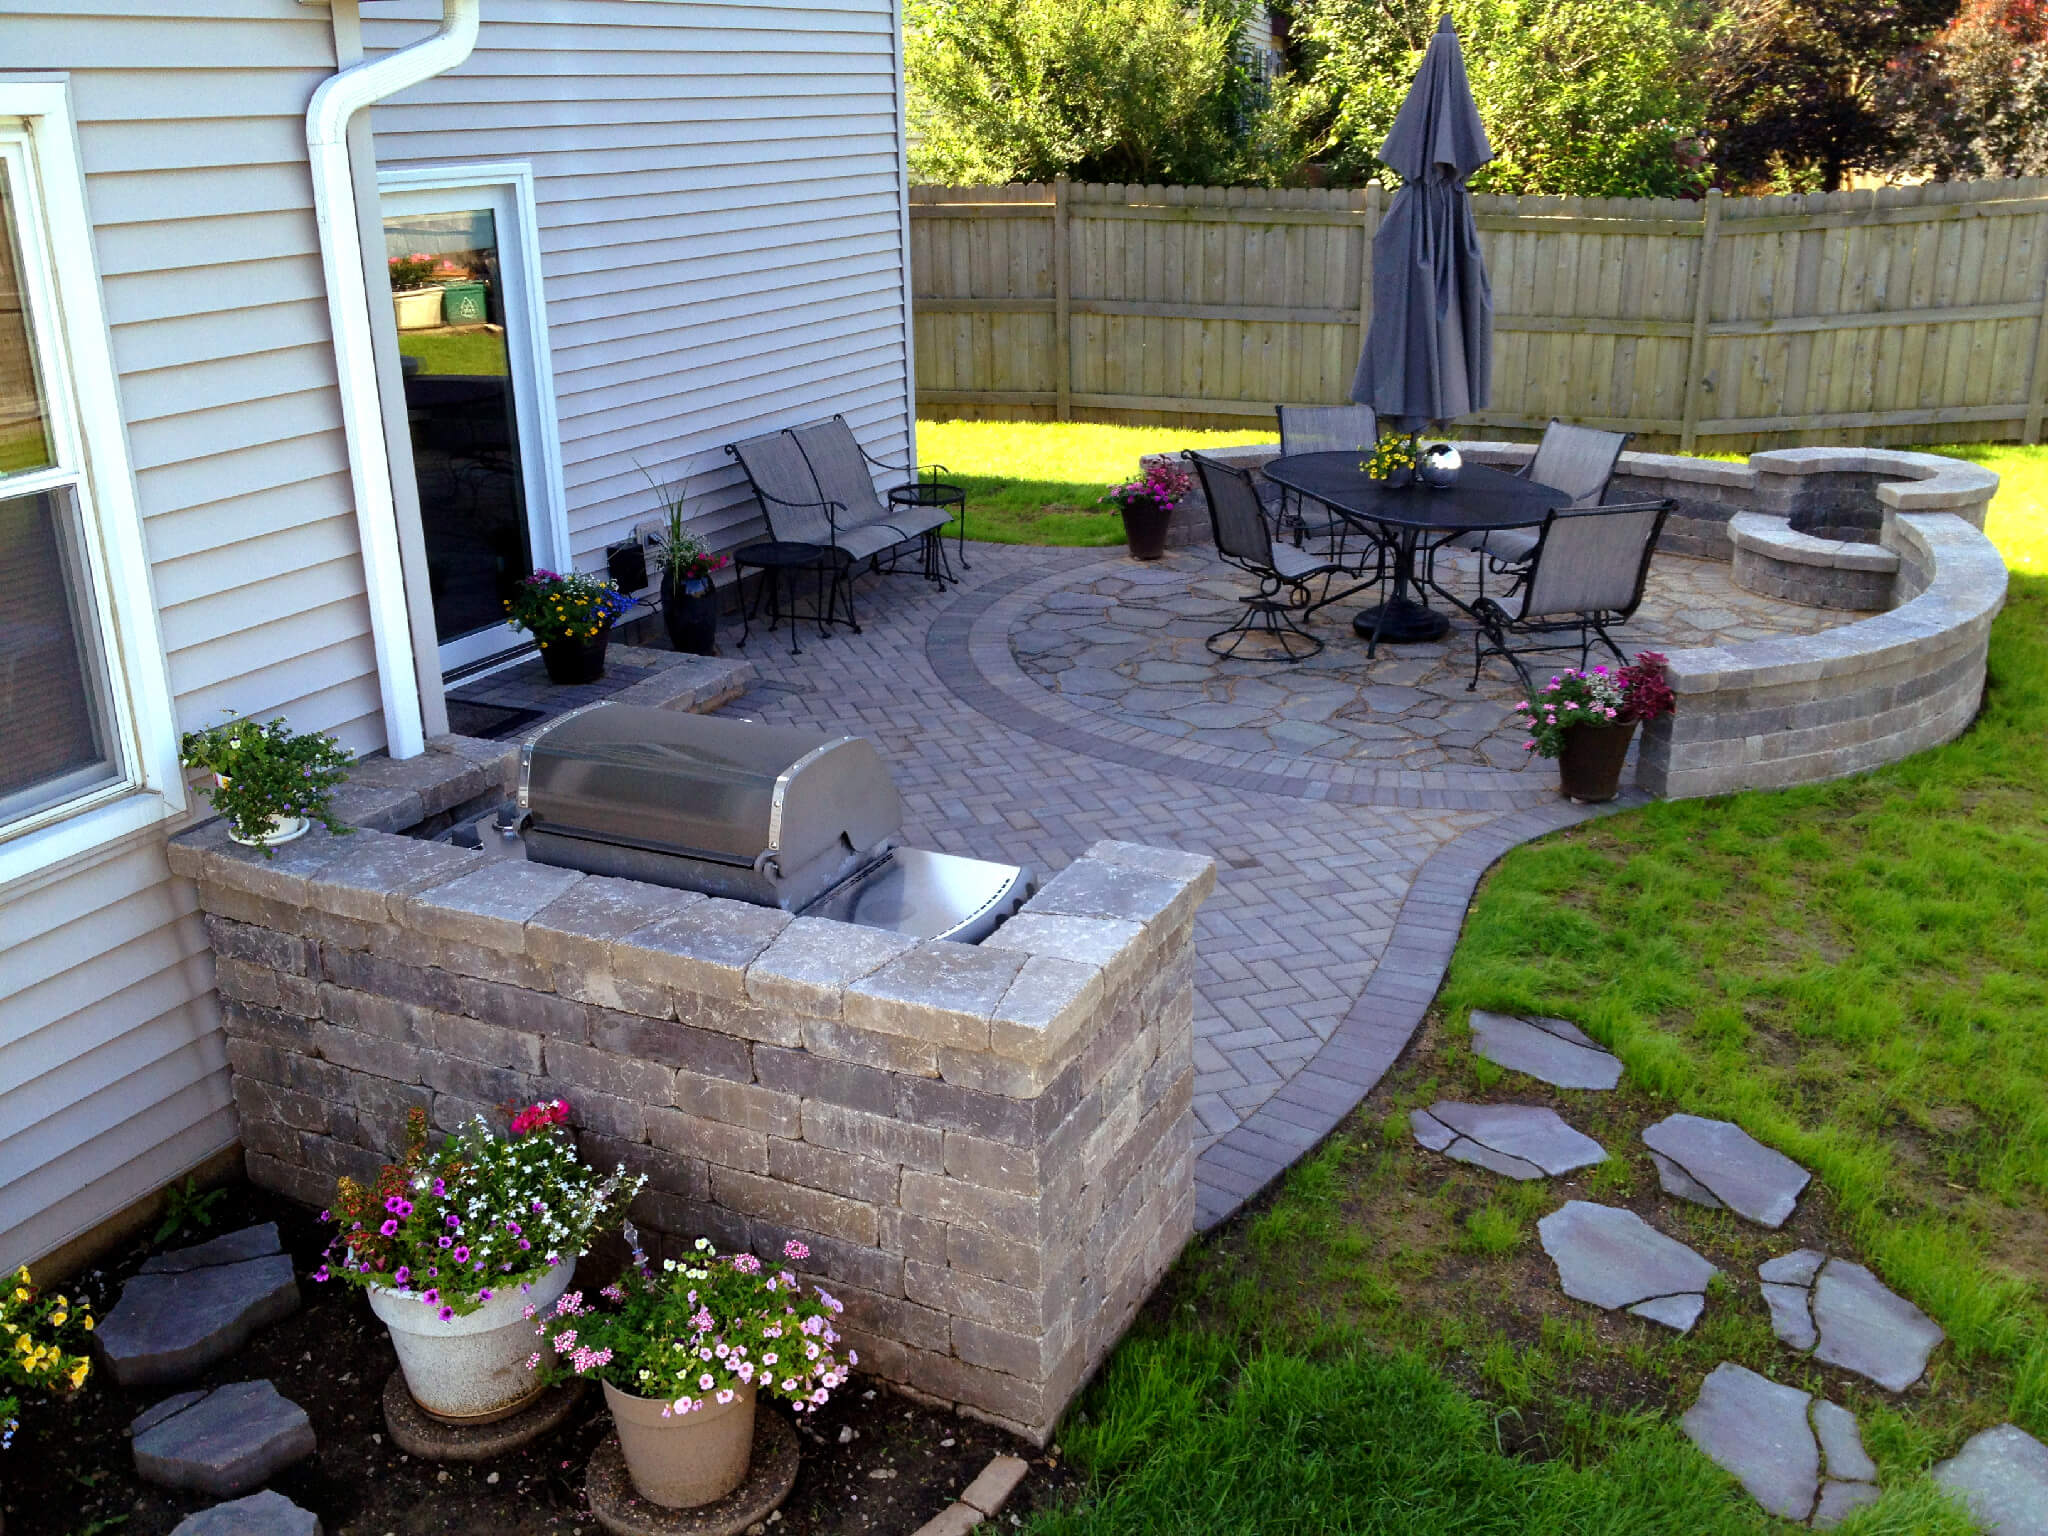 Patio with outdoor kitchen and fire pit